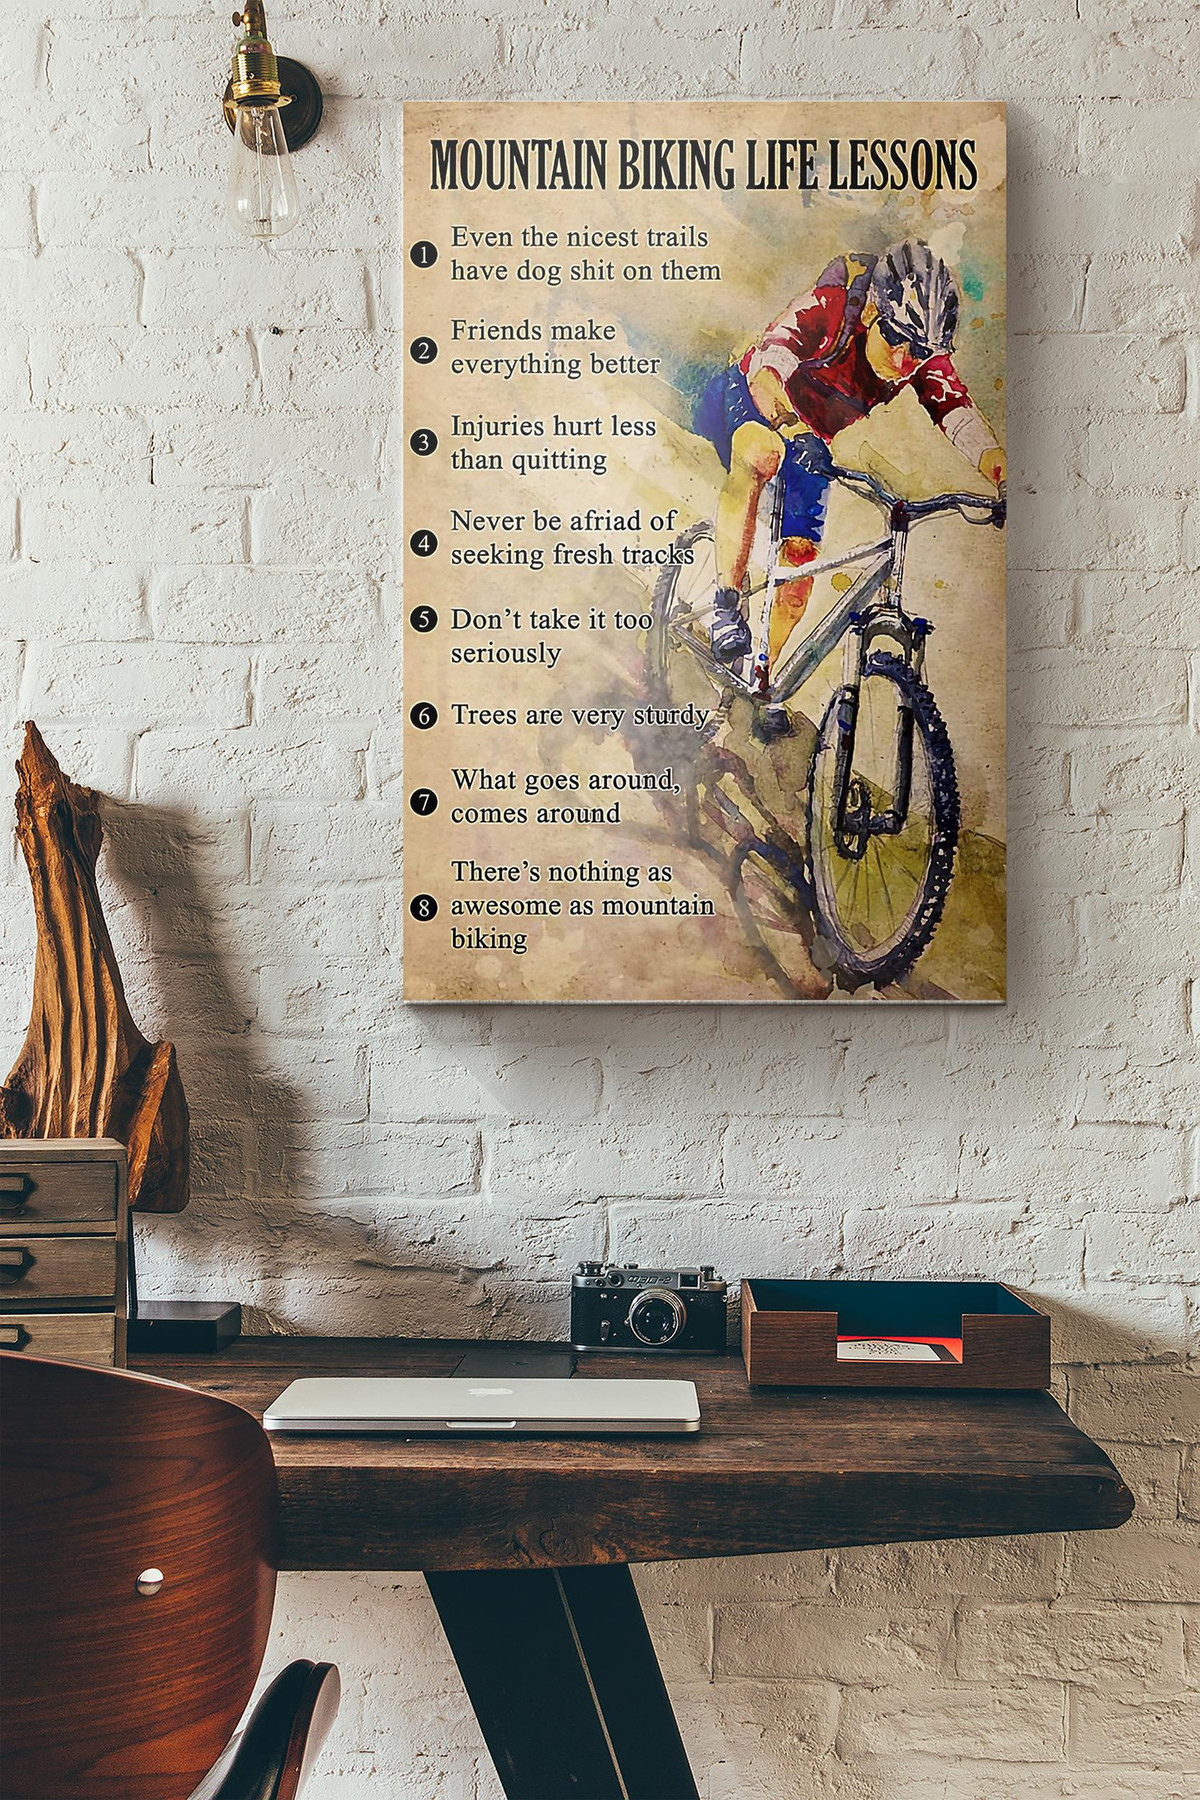 Cycling Mountain Biking Life Lessons Canvas Painting Ideas, Canvas Hanging Prints, Gift Idea Framed Prints, Canvas Paintings Wrapped Canvas 8x10